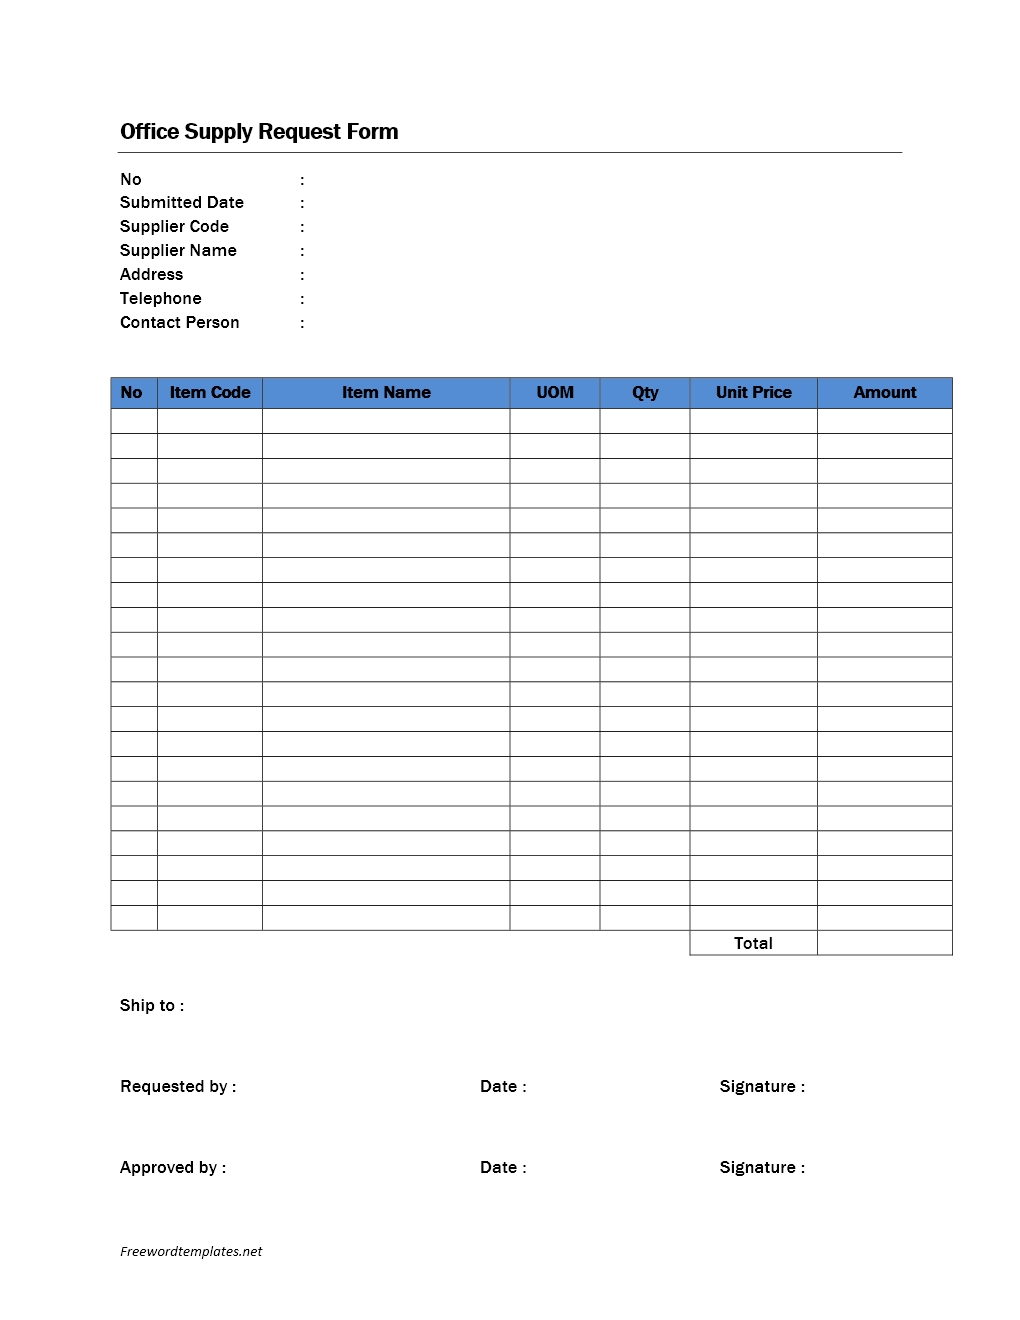 Request Form Examples